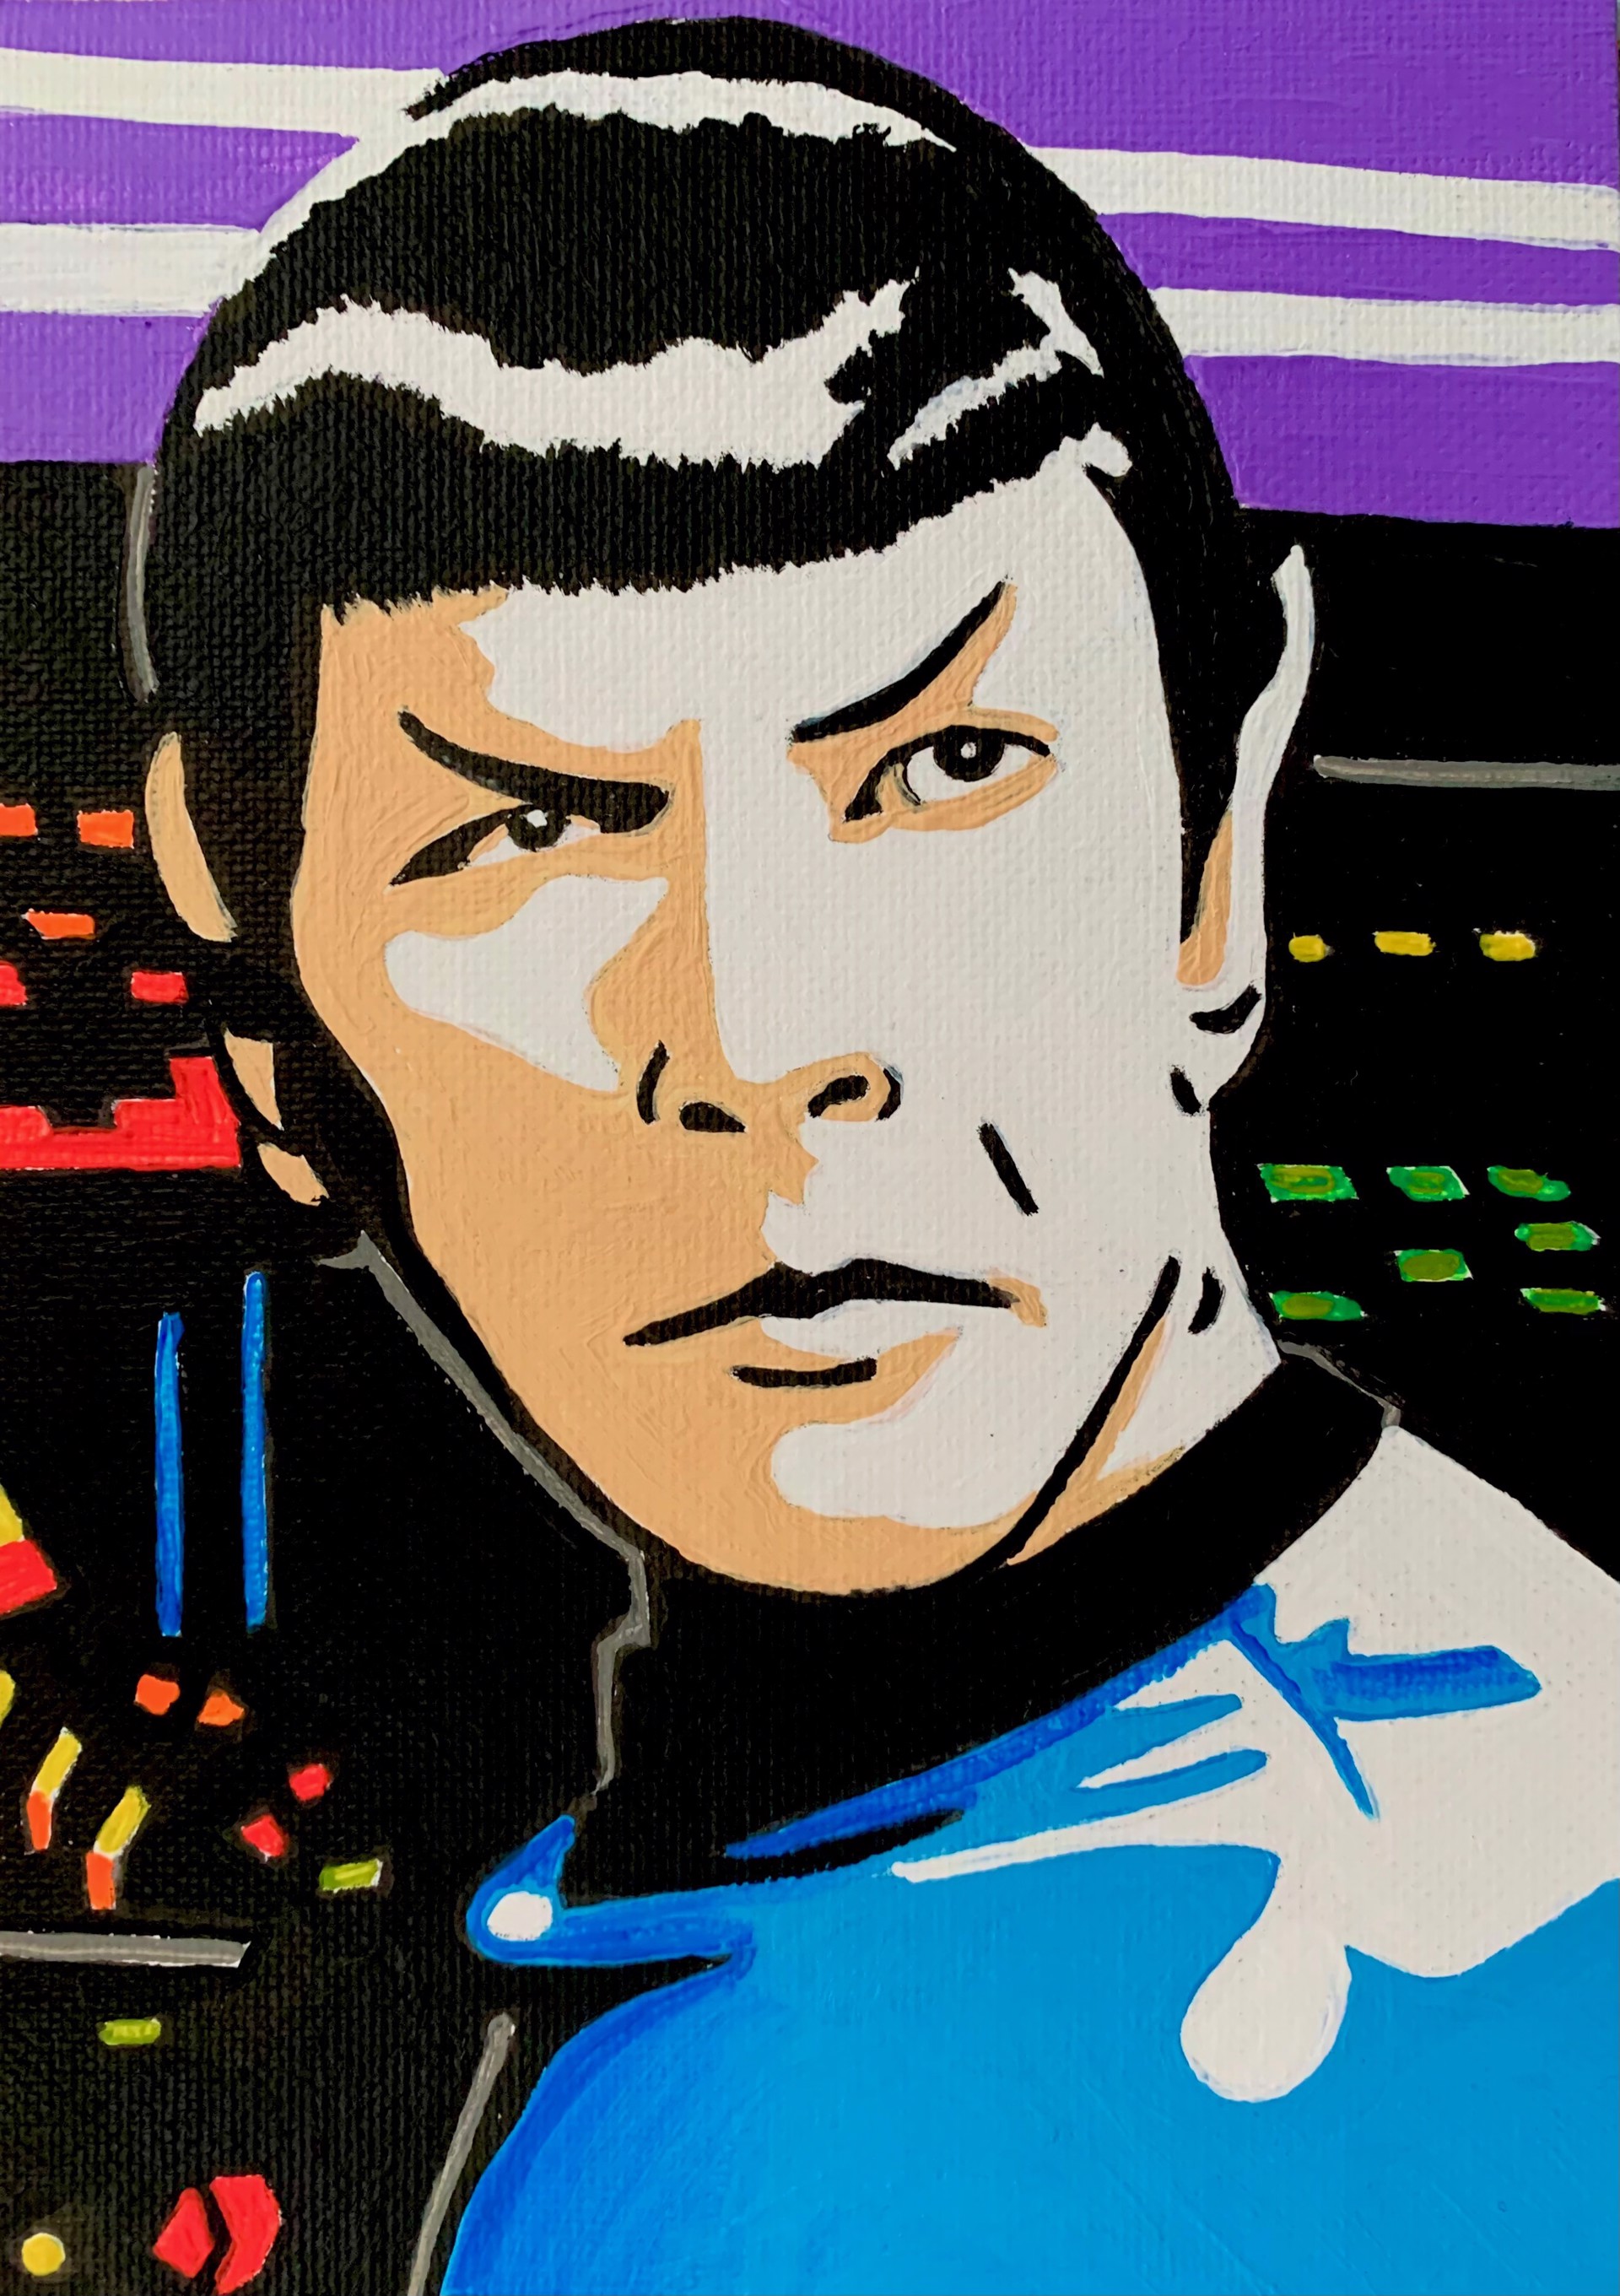 Mr. Spock by Craig Ford